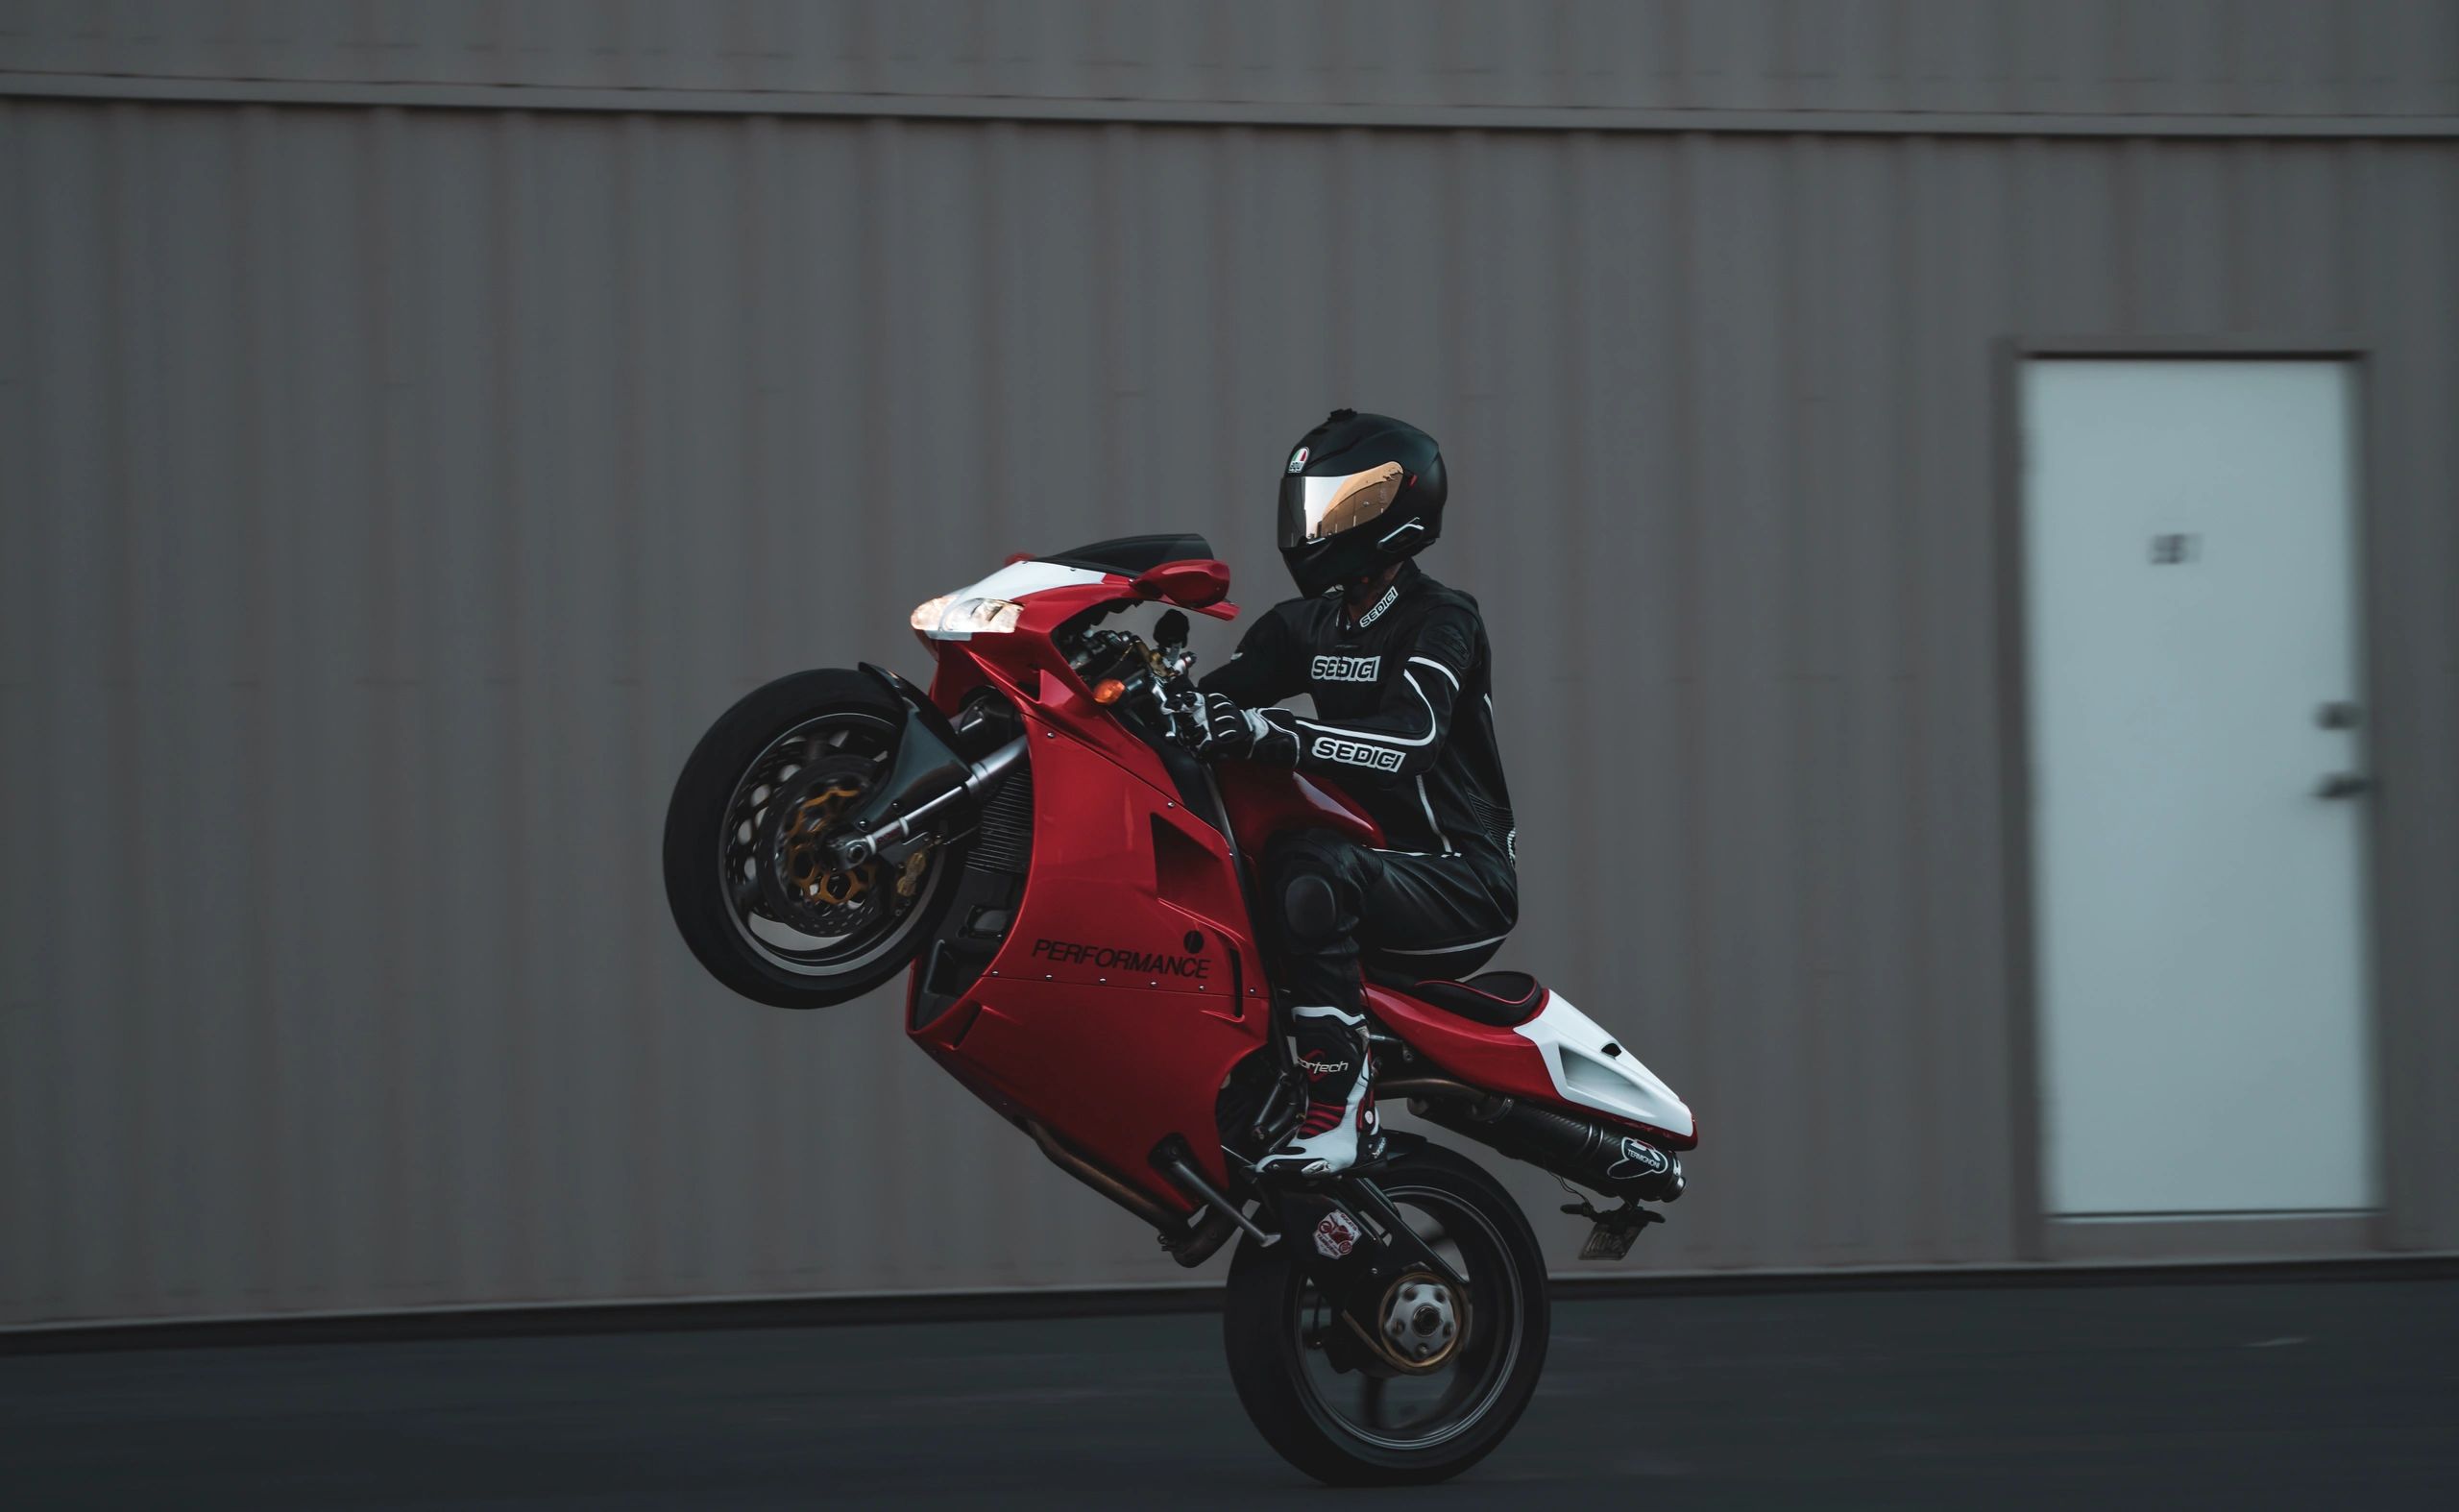 Red Ducati motorcycle rider doing a wheelie